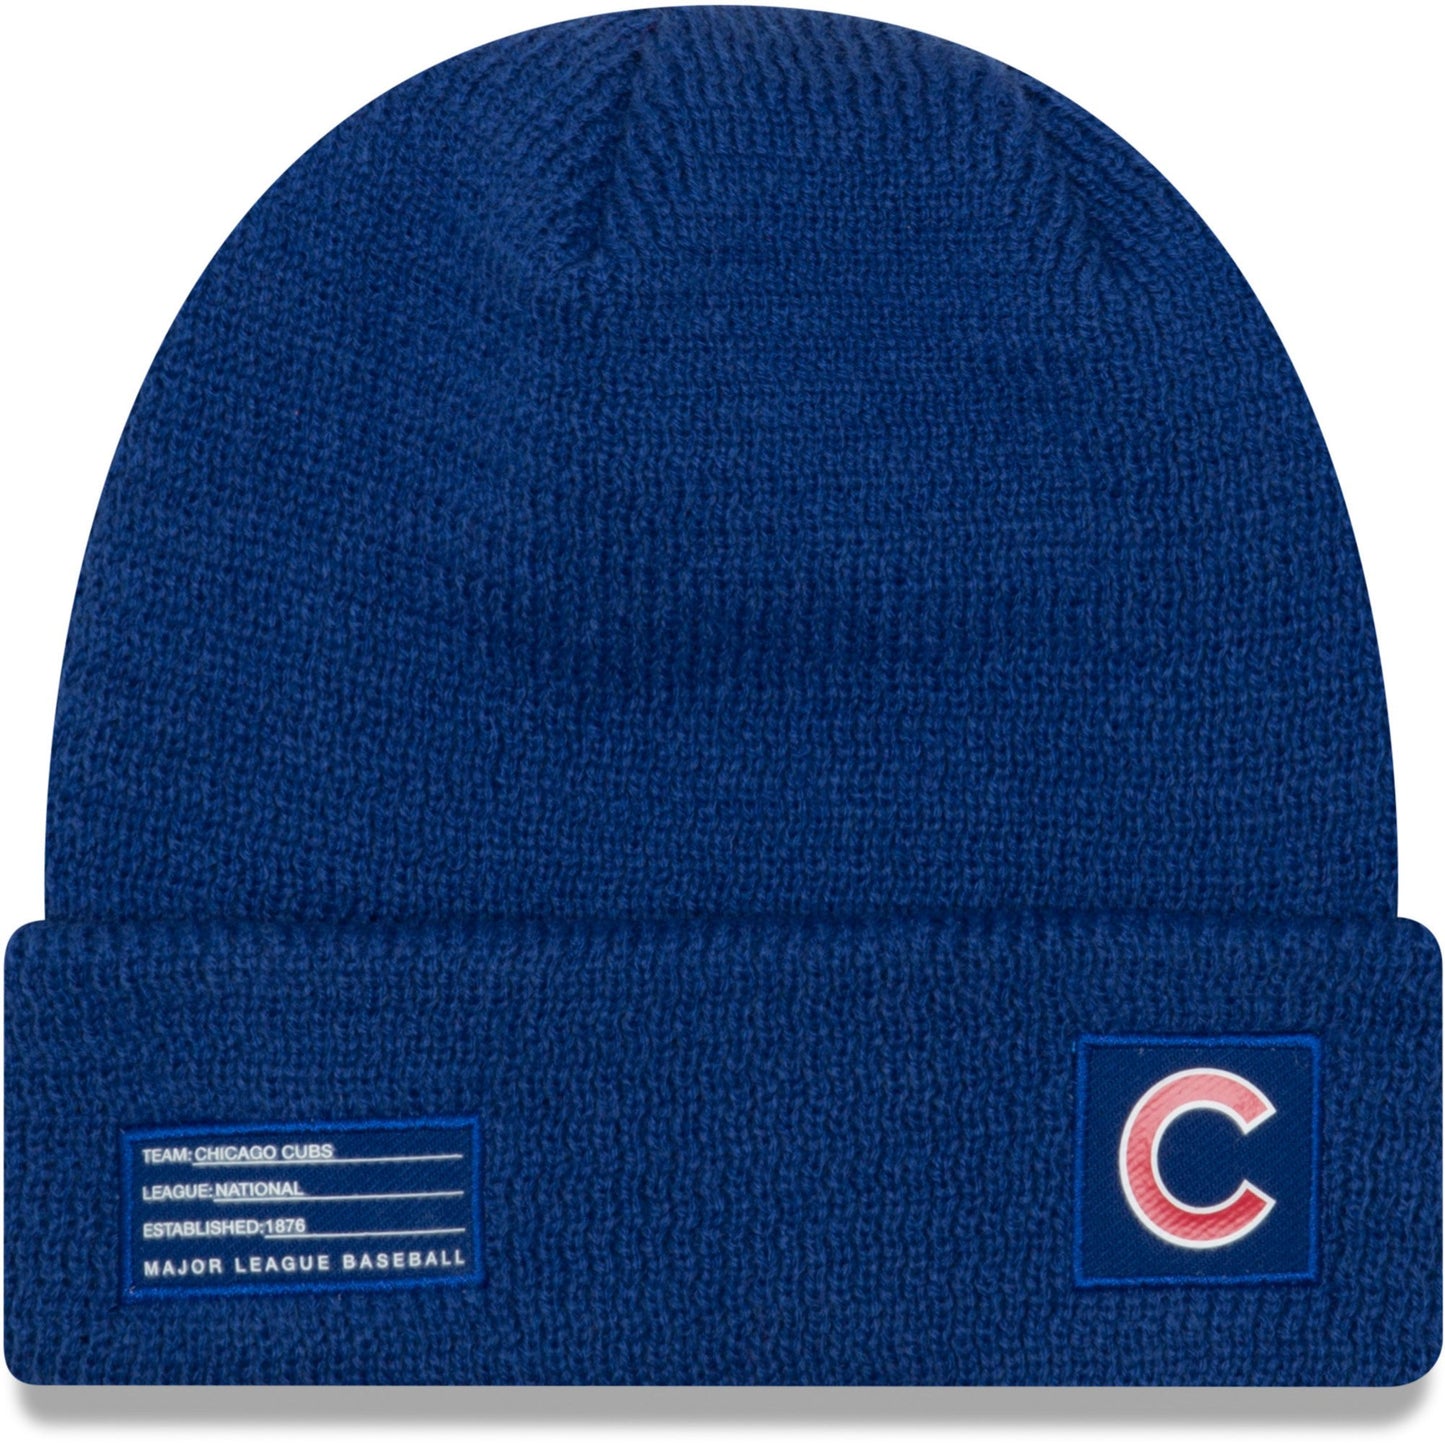 Men's Chicago Cubs New Era Royal On-Field Sport Cuffed Knit Hat